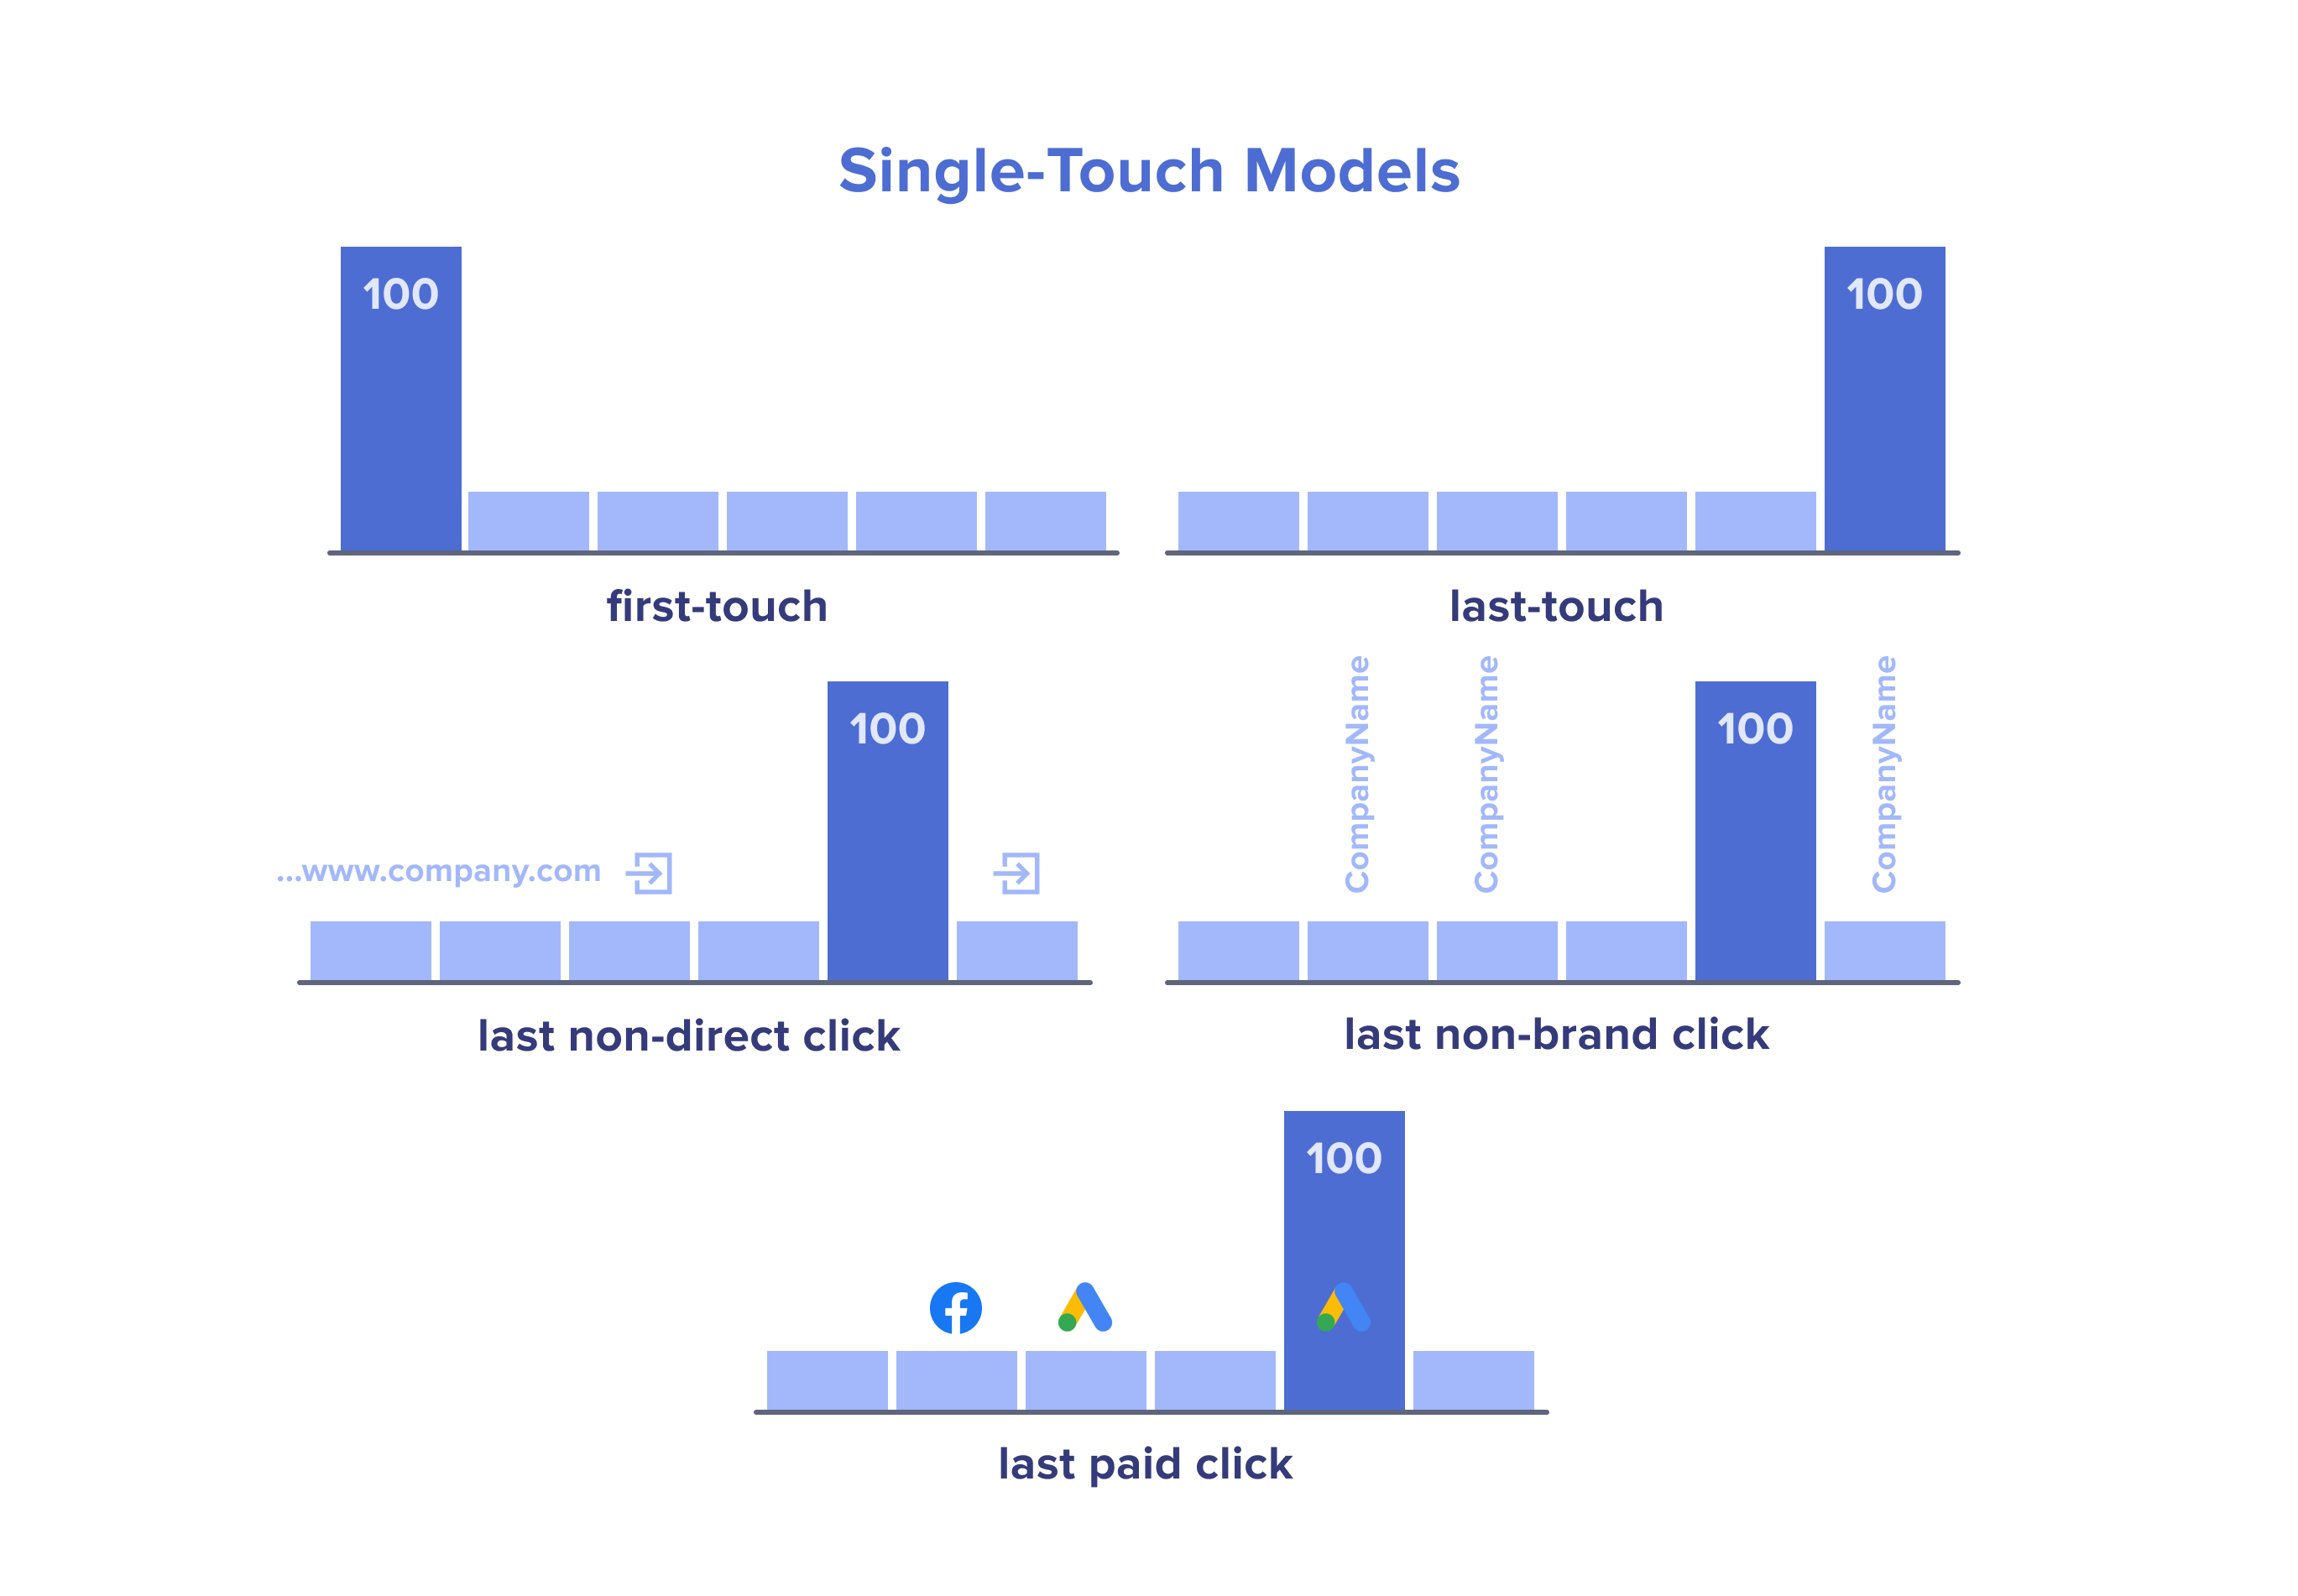 What is an attribution model in marketing? Single-touch models